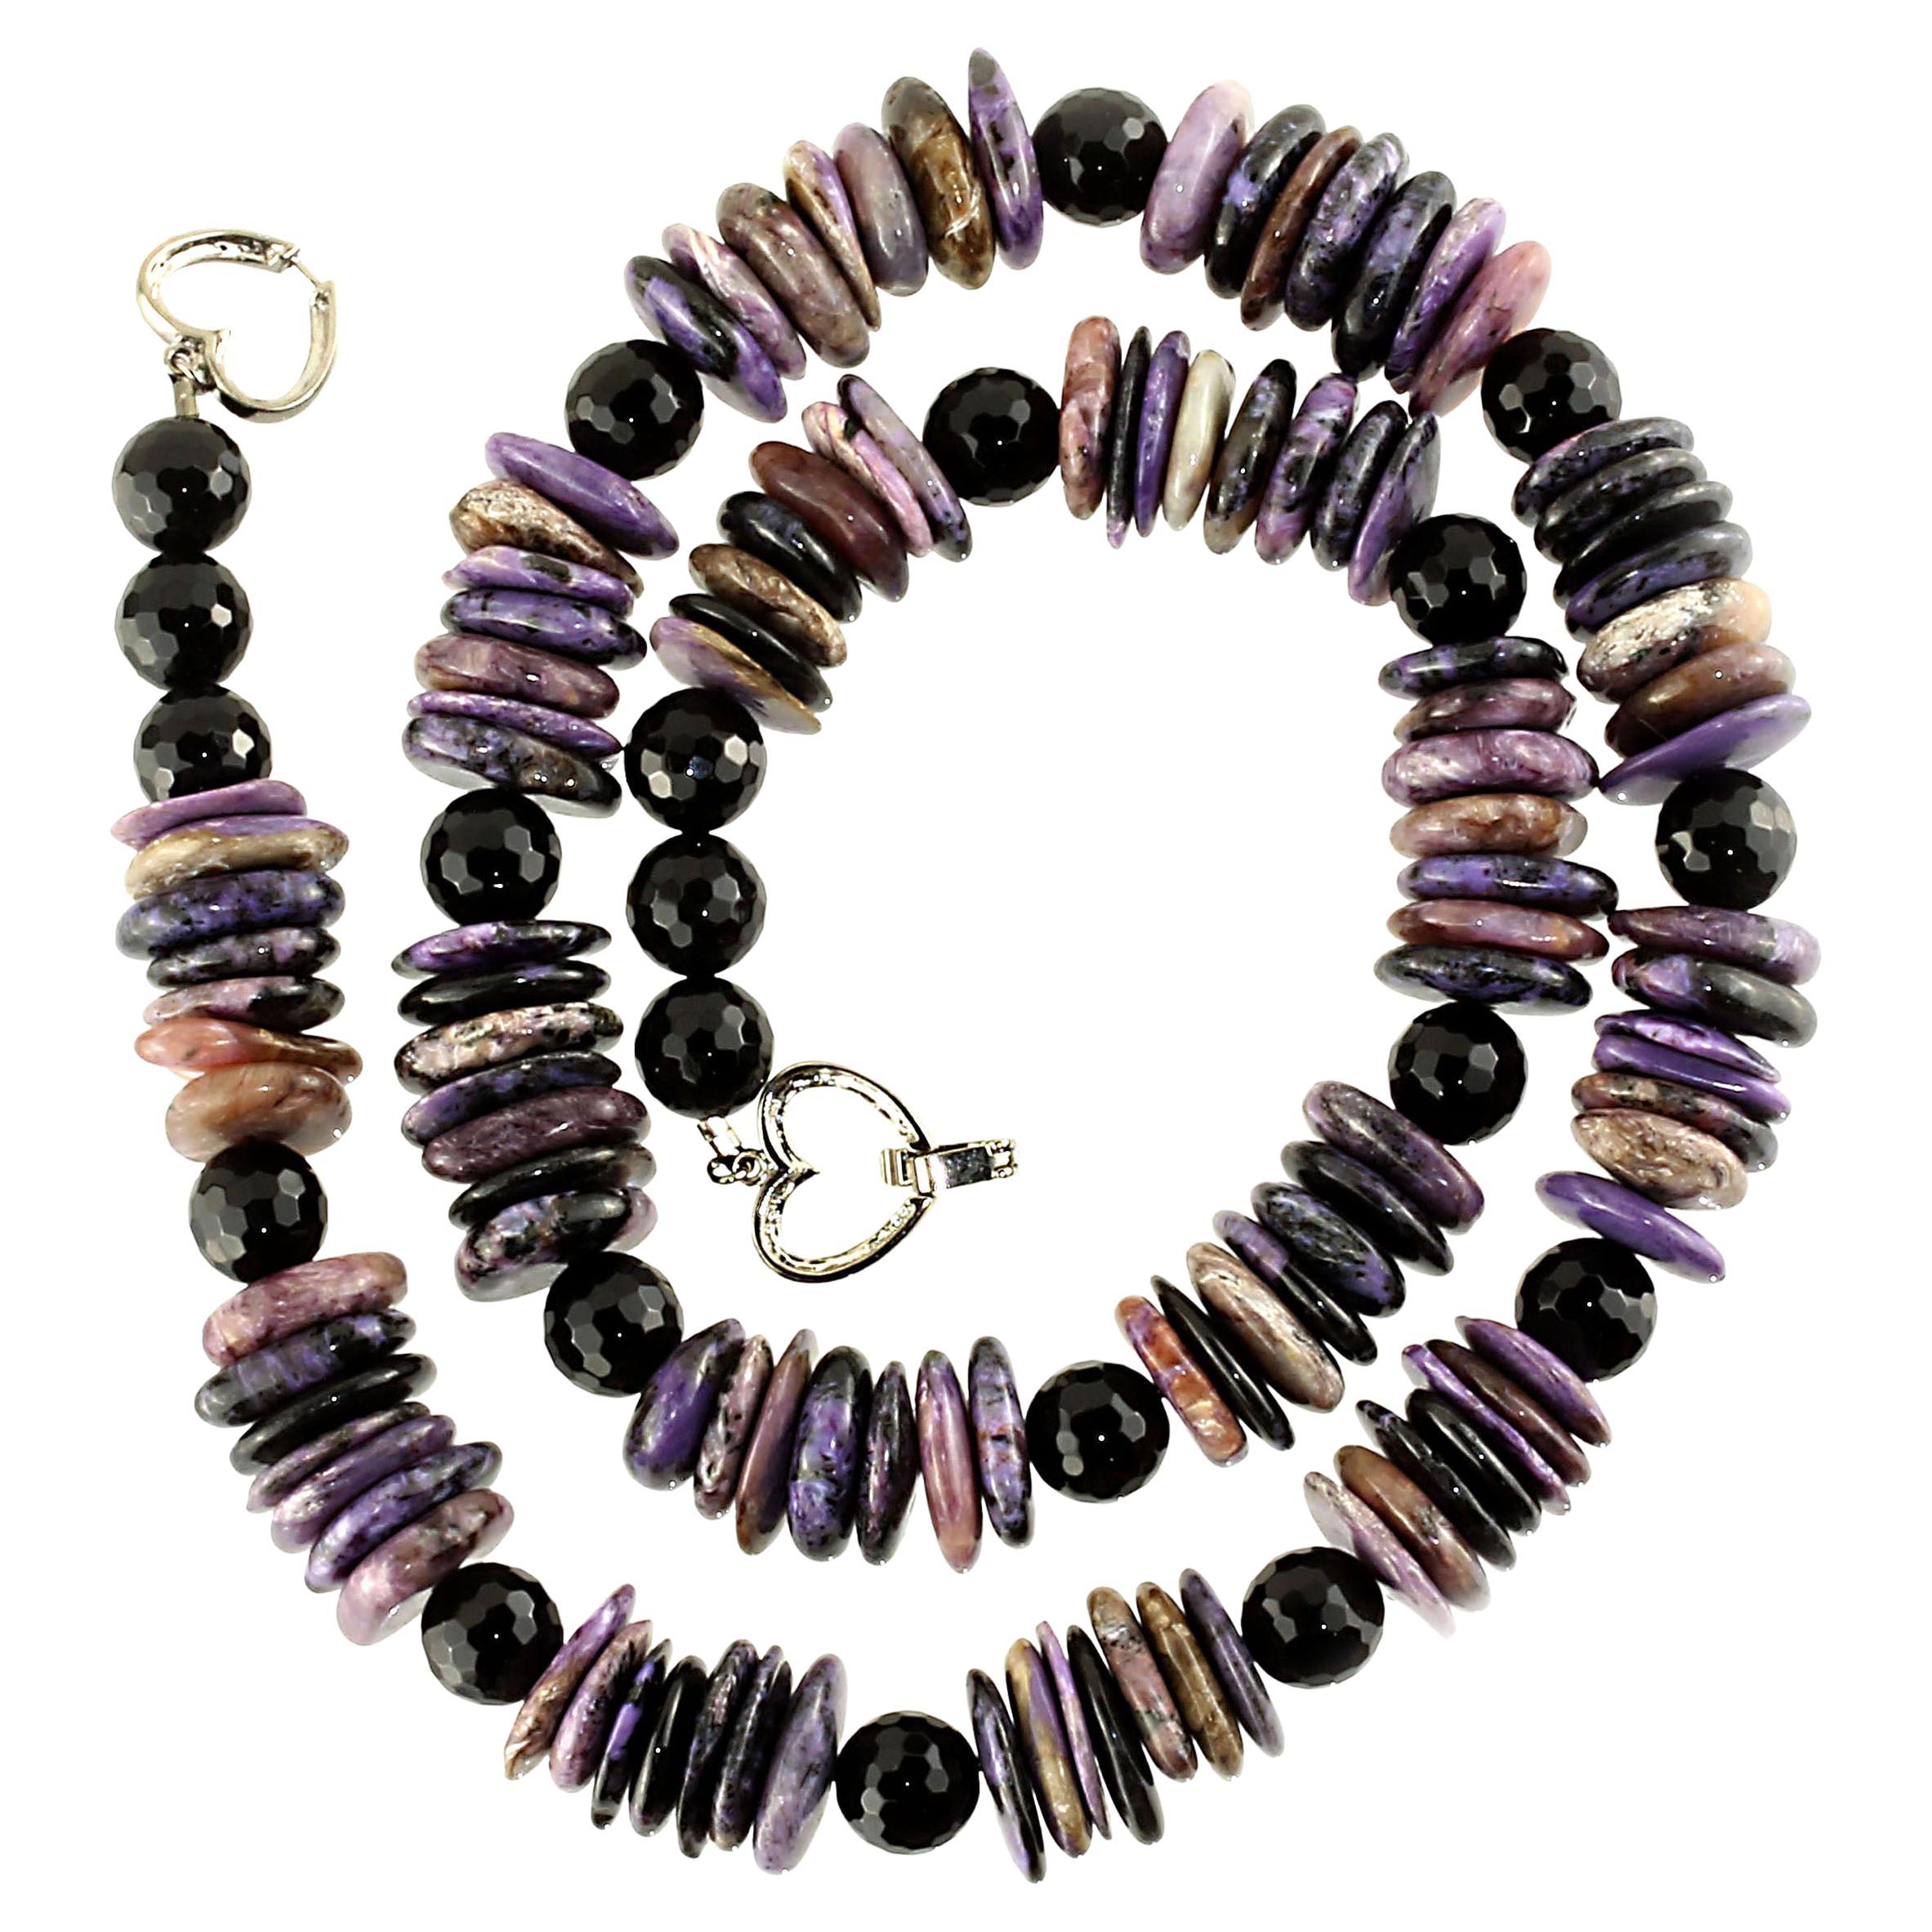 Handmade beautiful purple Charoite in Matrix necklace. The highly polished Charoite is thinly sliced and spaced with faceted onyx spheres. This statement necklace is 25 inches in length. It features a double sided silver plate heart clasp.